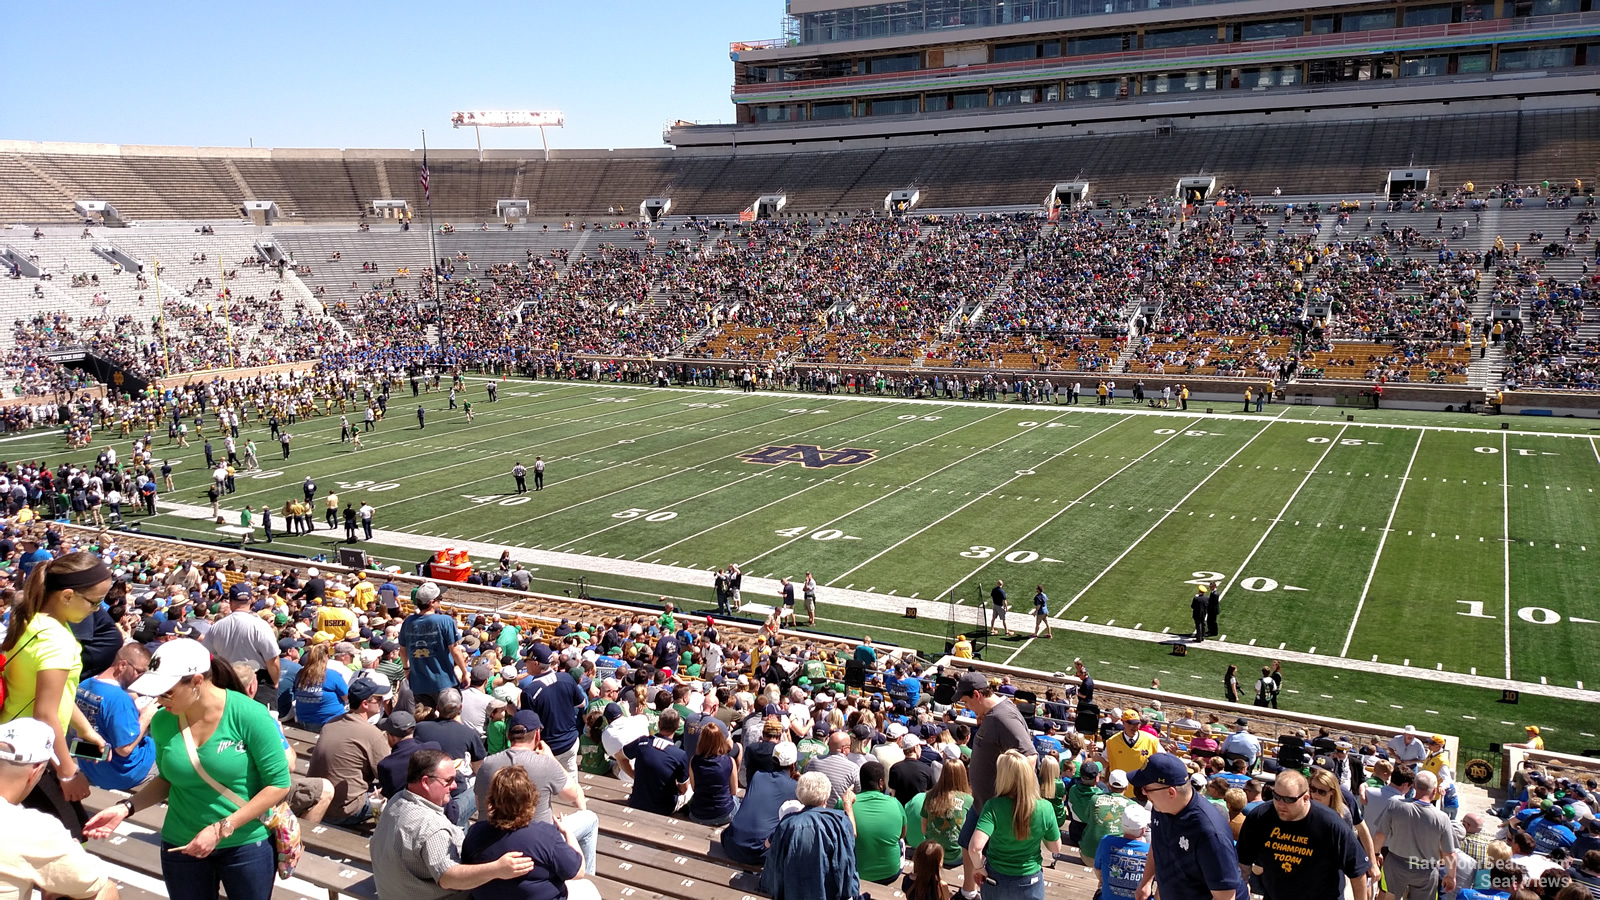 section 25, row 51 seat view  - notre dame stadium